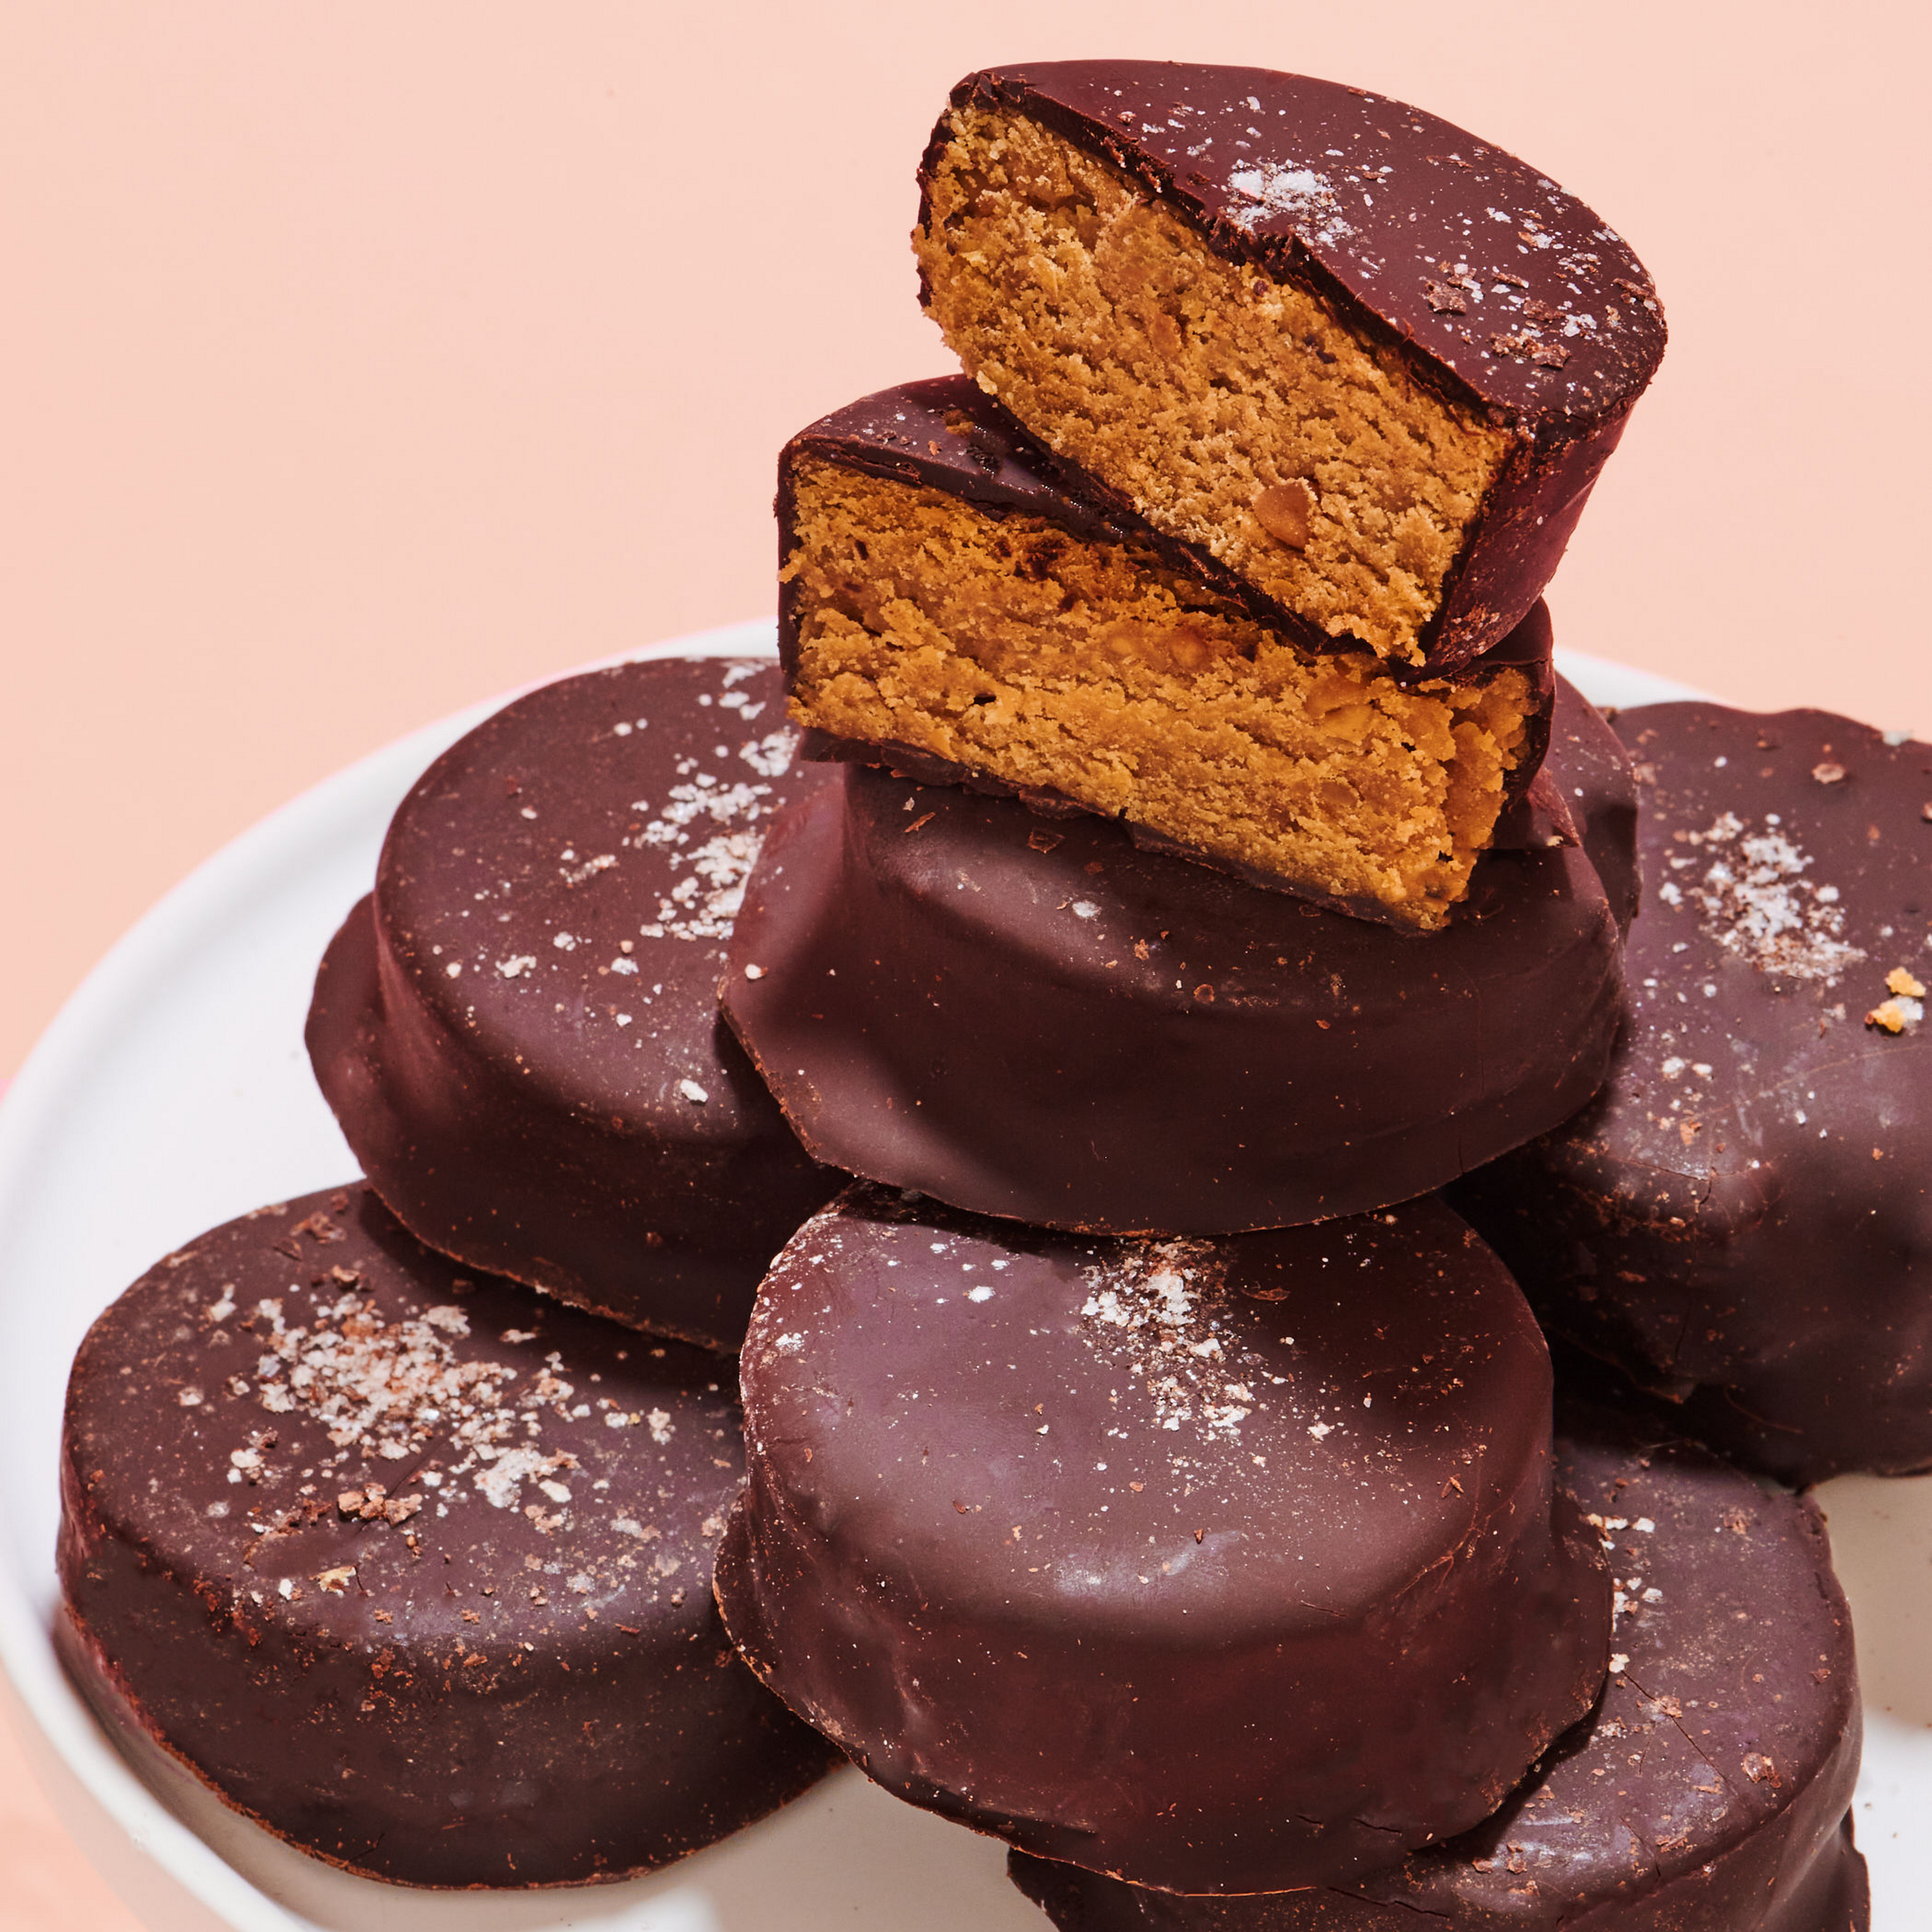 Berets: Almond Butter Chocolate-Coated Protein Bites infused with Maca root (Box of 6 twin packs)